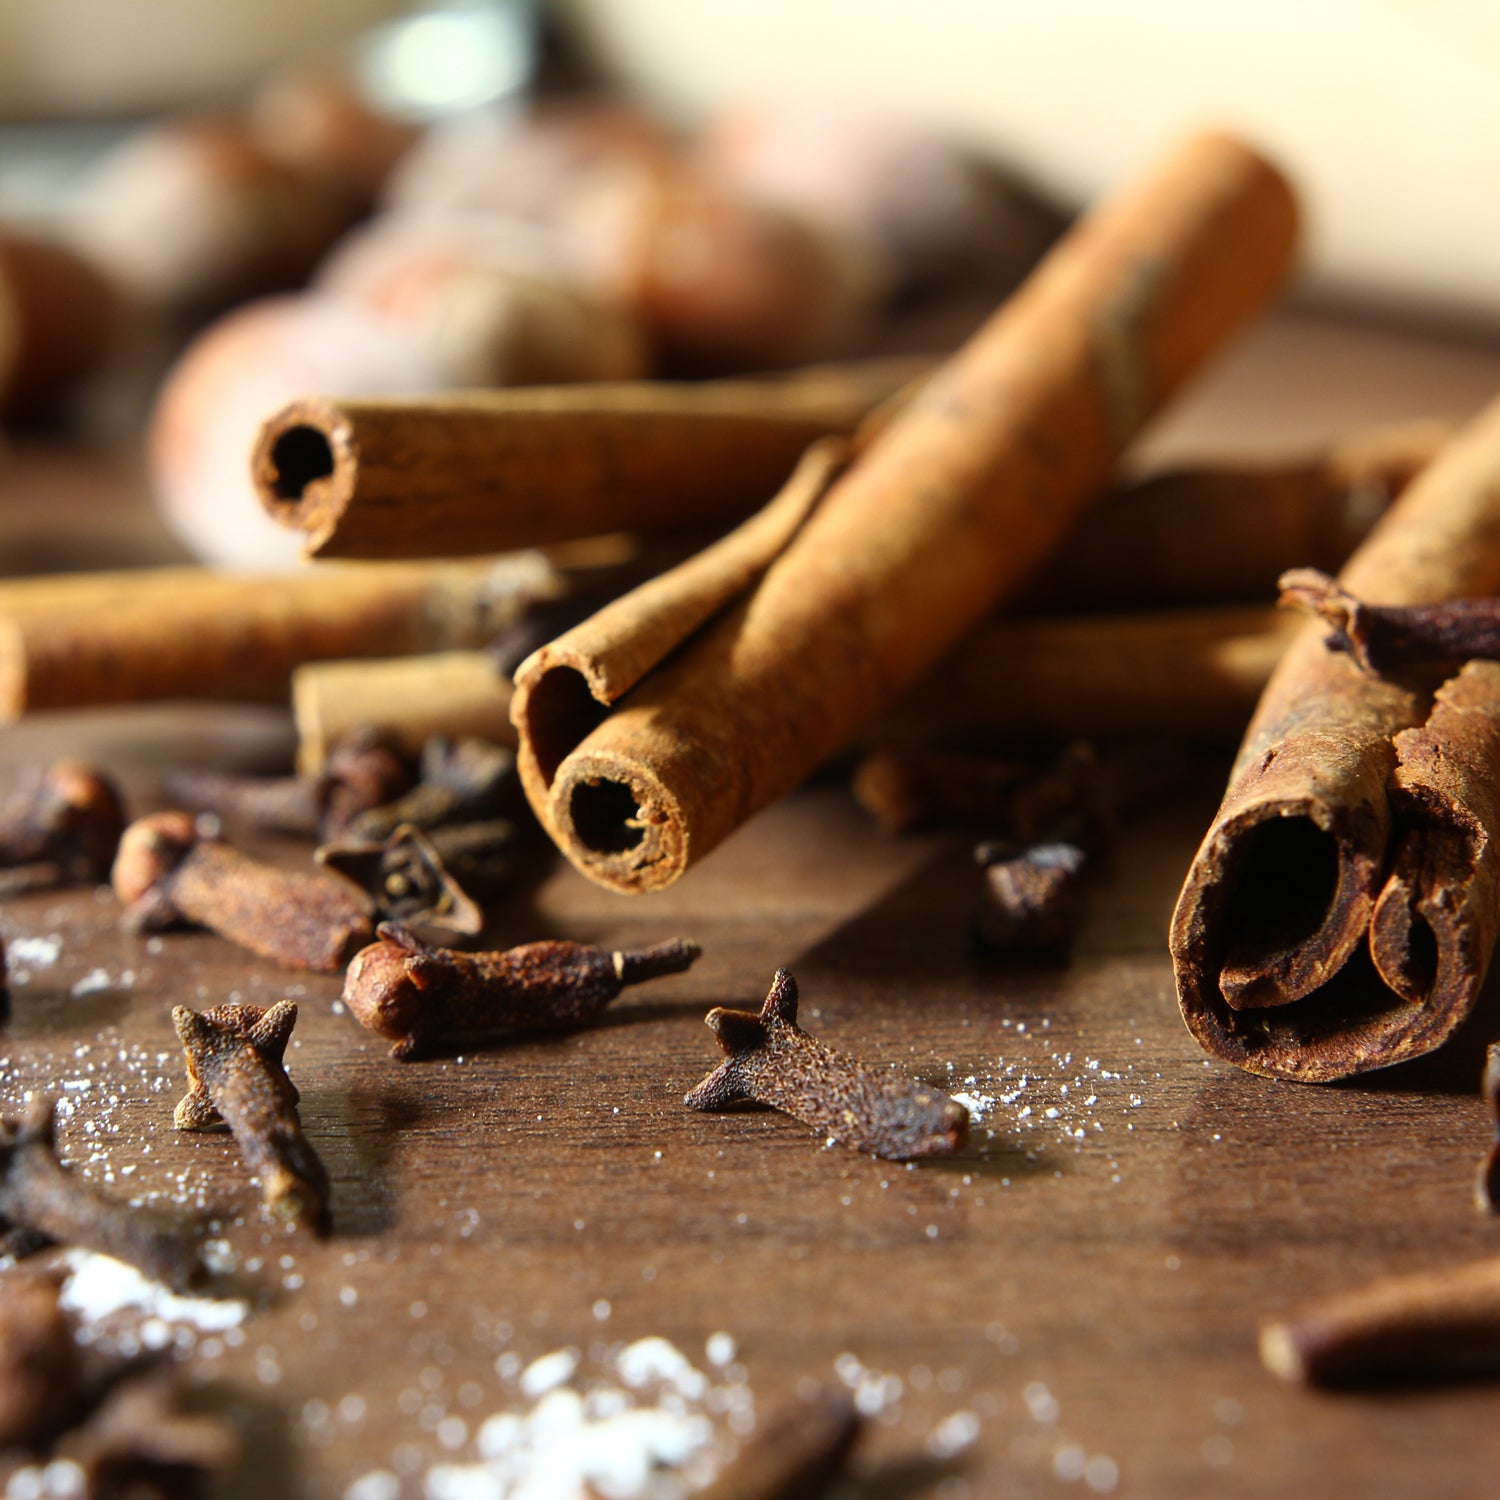 Cinnamon sticks -  a core ingredient in this sweet candle